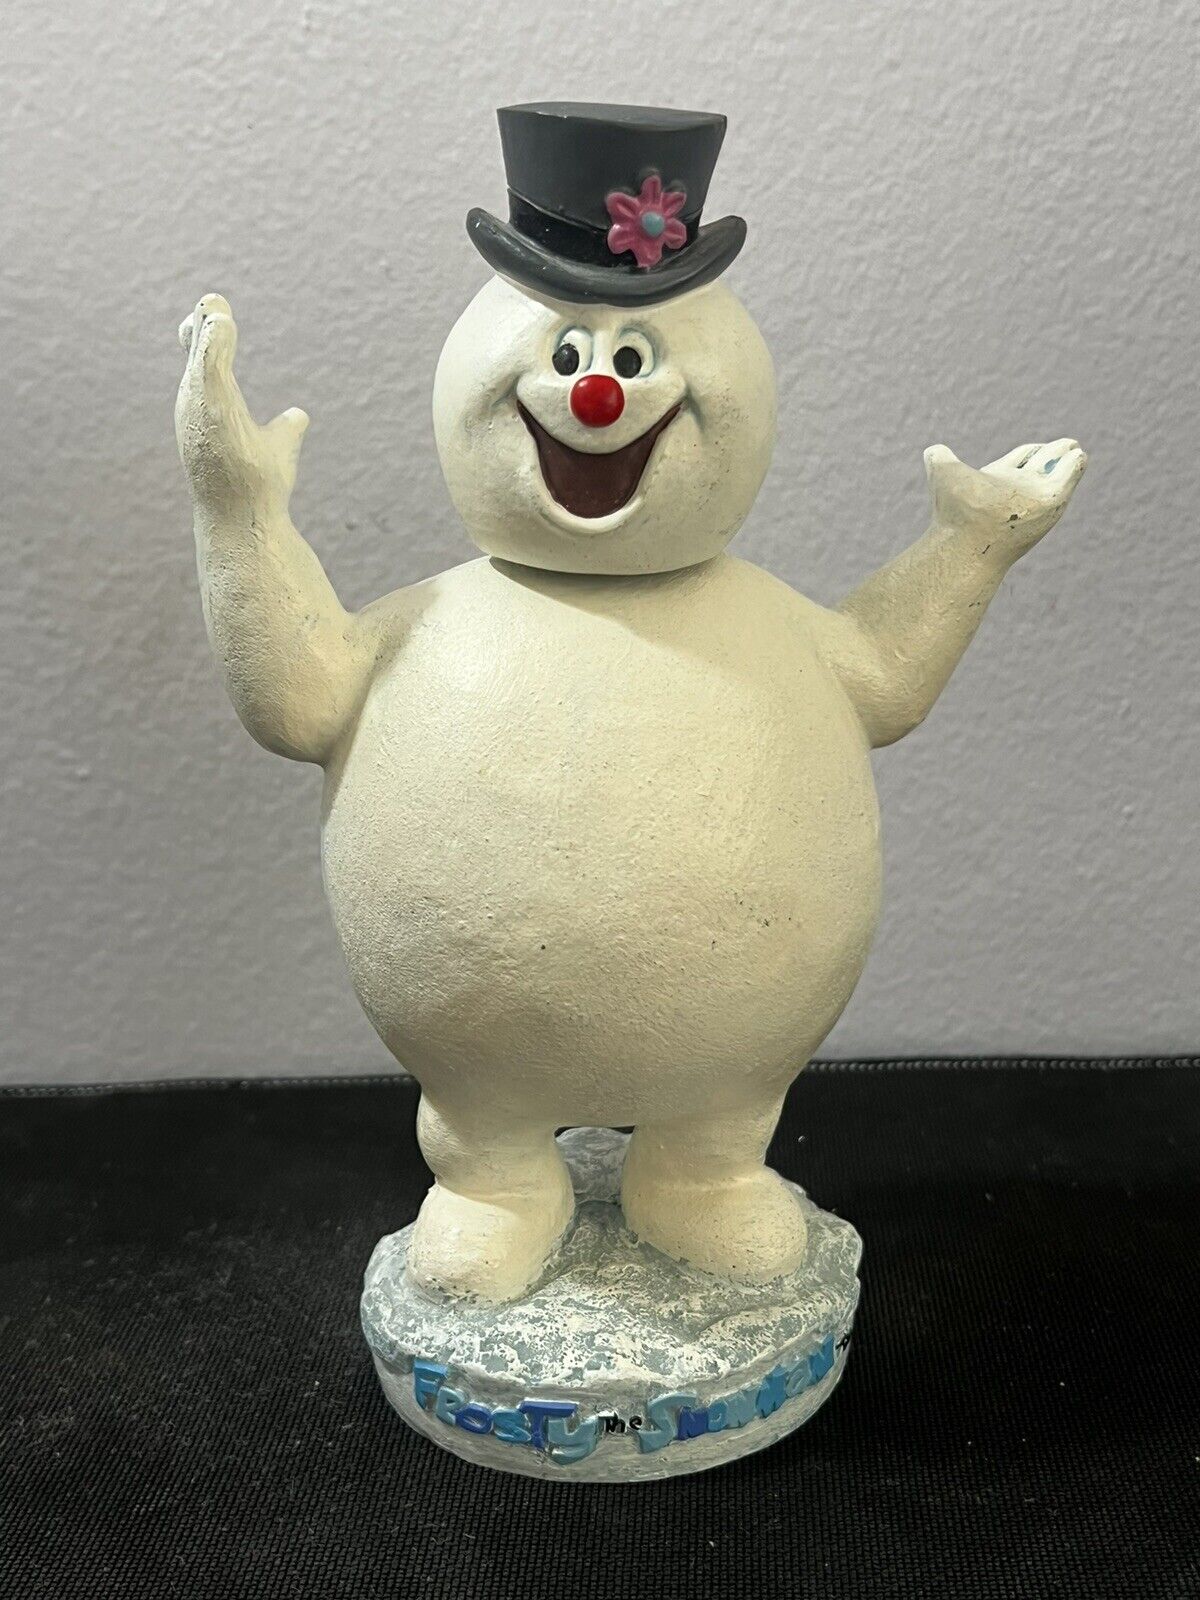 Frosty the Snowman Official Warner Chappell 7” Bobble Head Figure